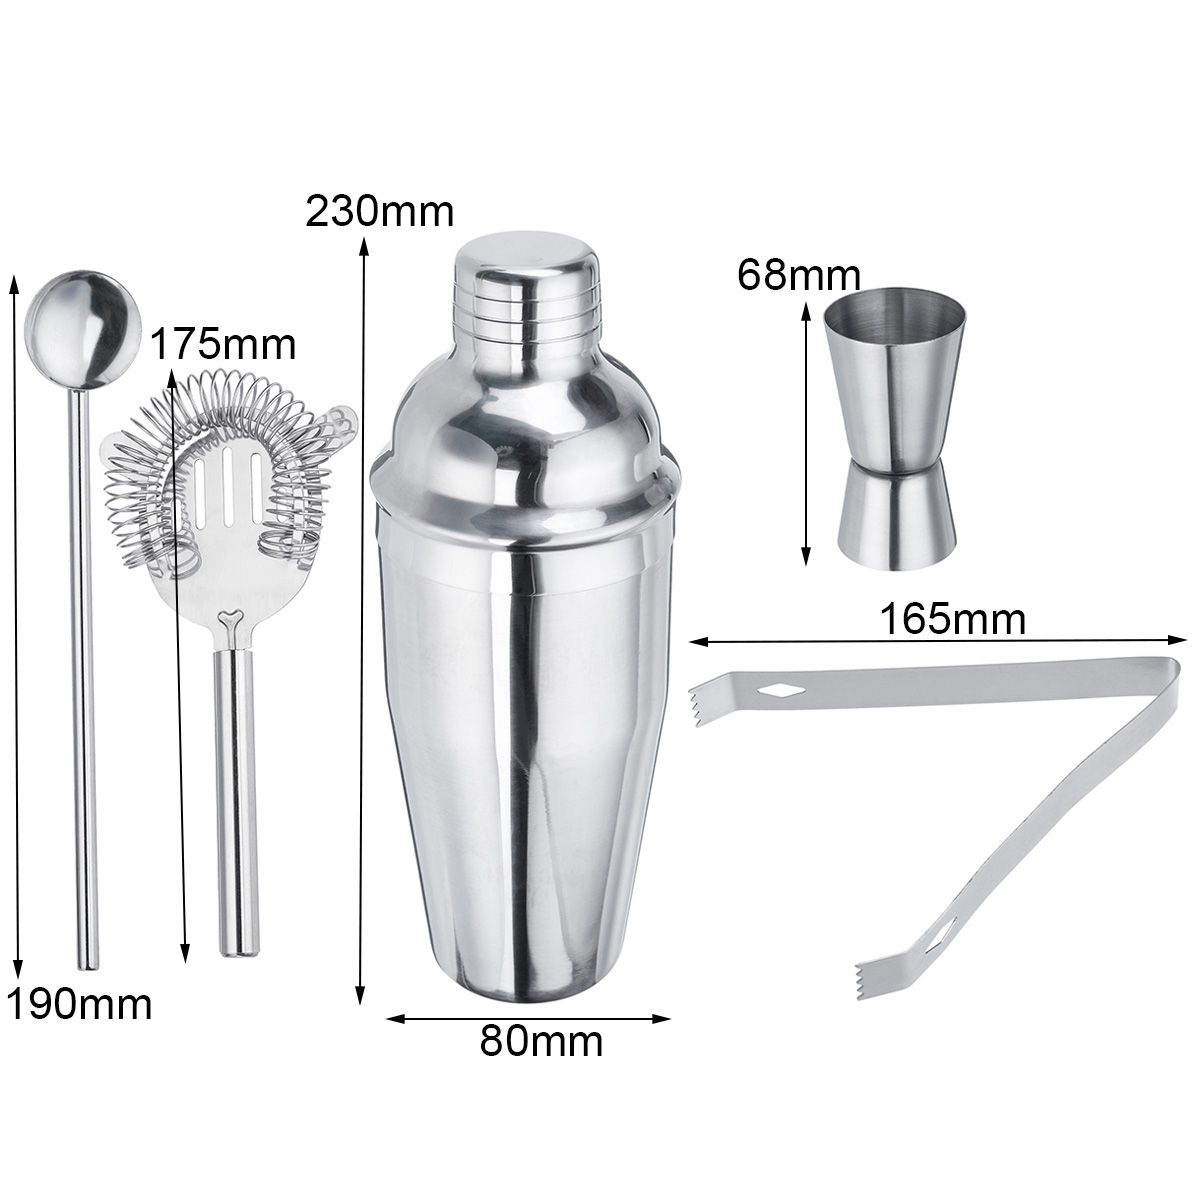 5Pcs-Stainless-Steel-Cocktail-Drink-Bartender-Shaker-Mixer-Bar-Mixing-Kit-Tools-1706151